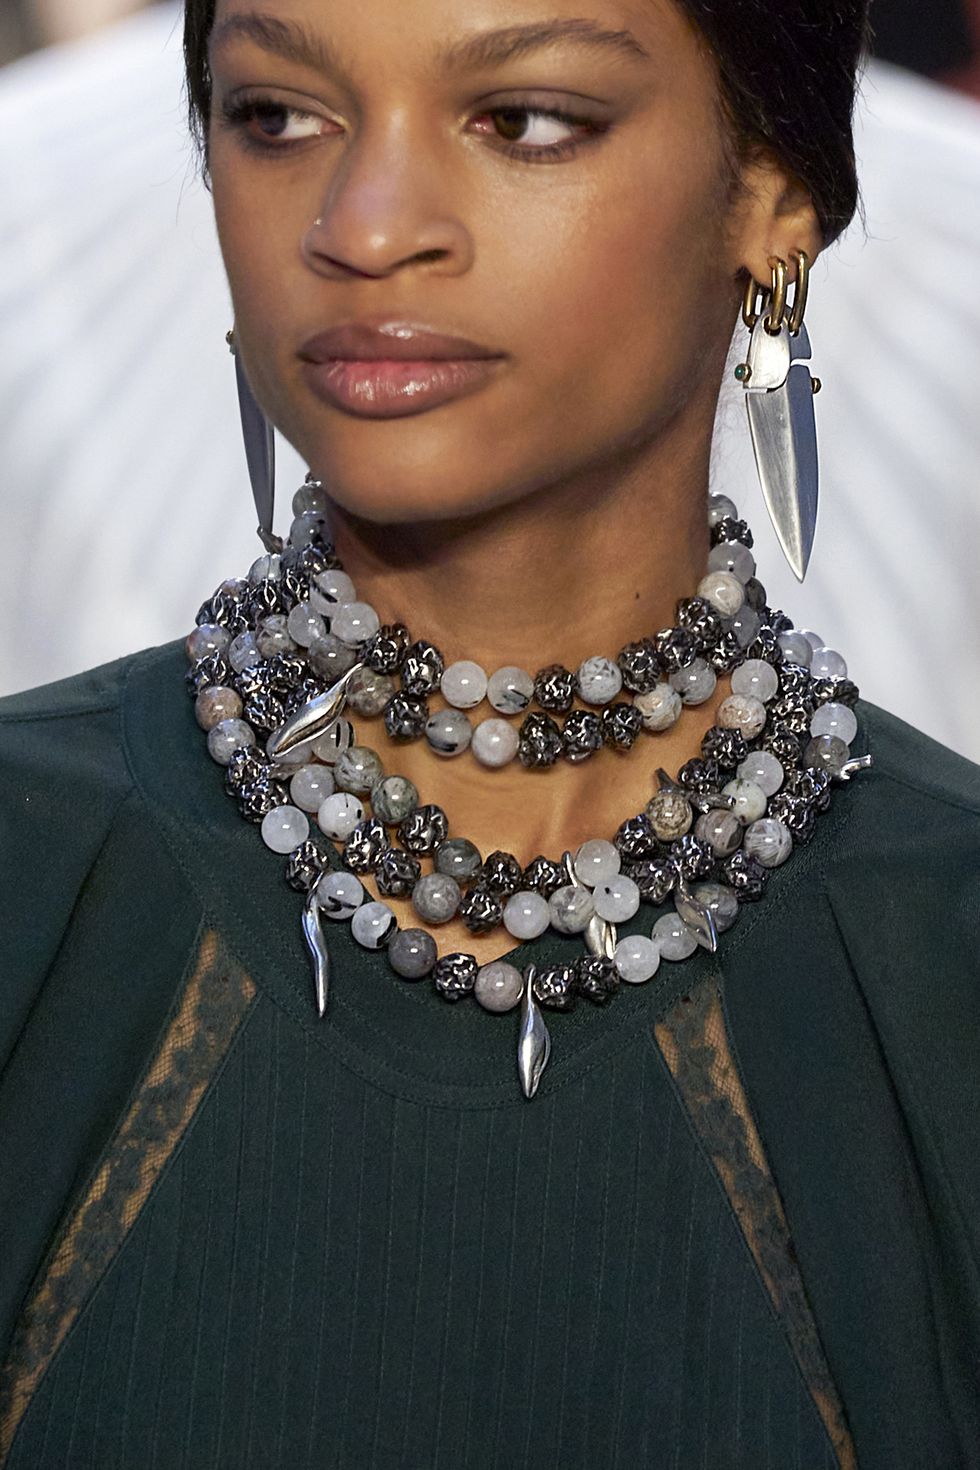 Hair, Neck, Lip, Beauty, Fashion accessory, Fashion, Hairstyle, Necklace, Jewellery, Black hair, 